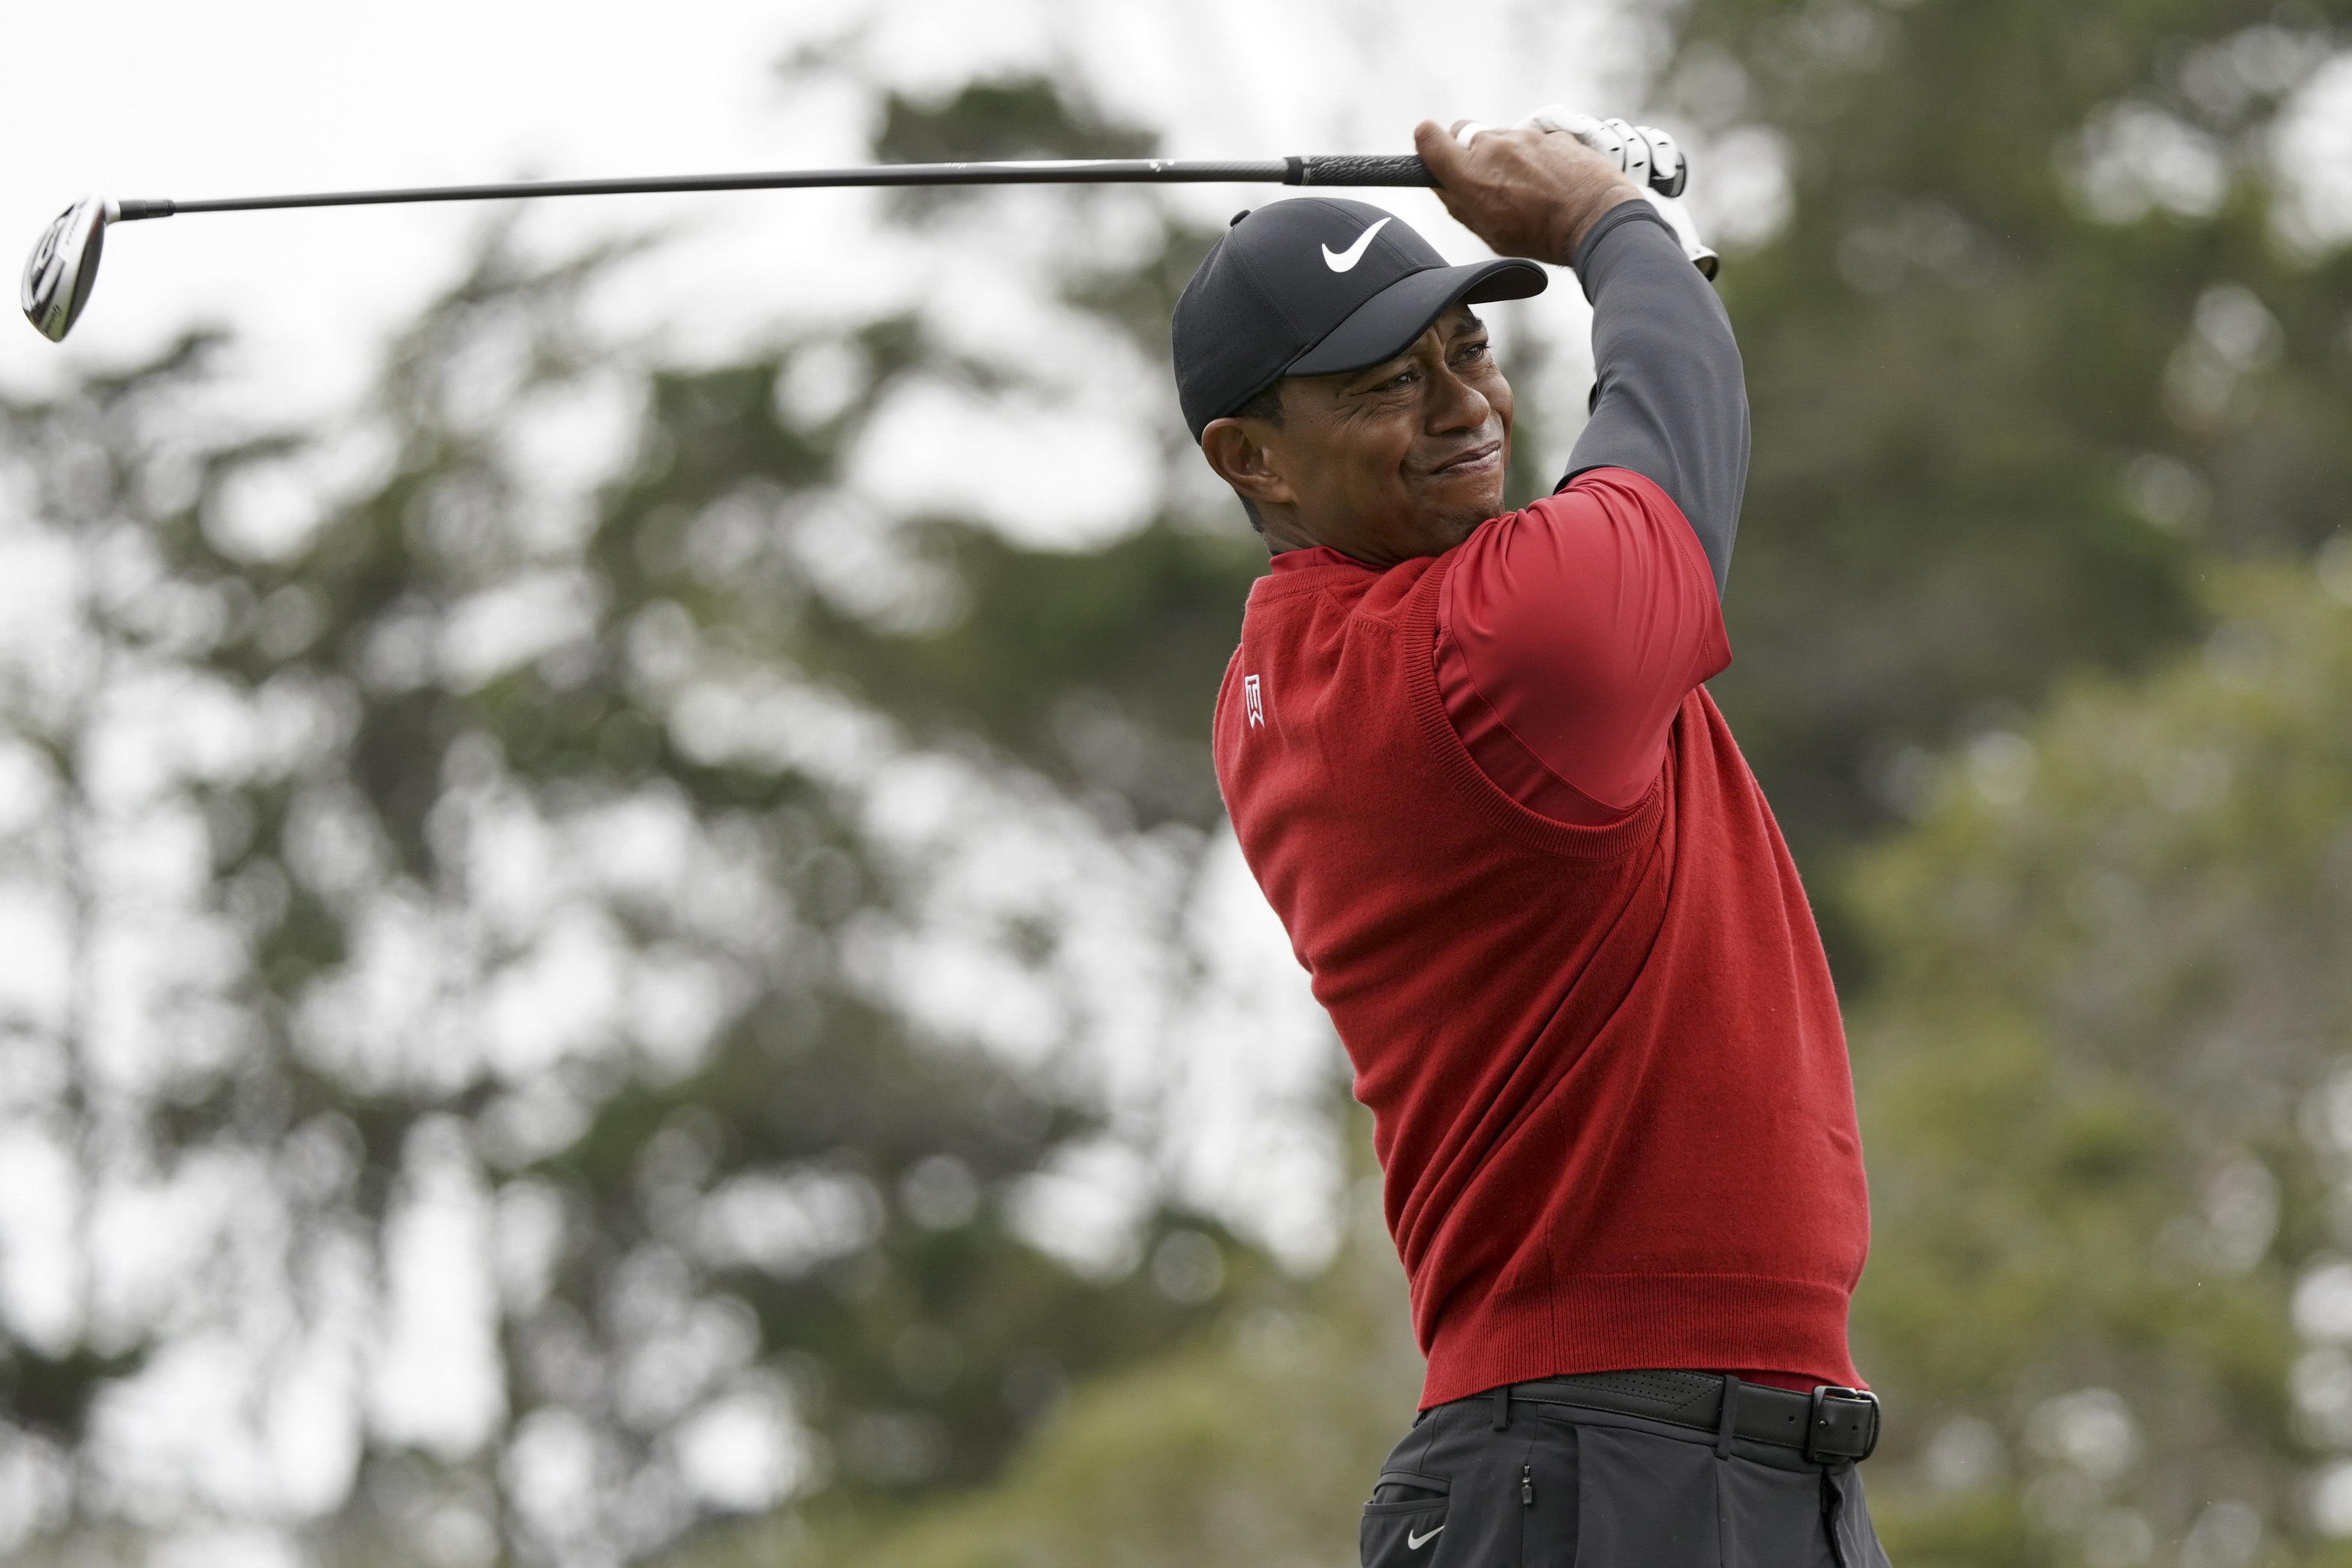 The new Tiger Woods manages his health more than his game